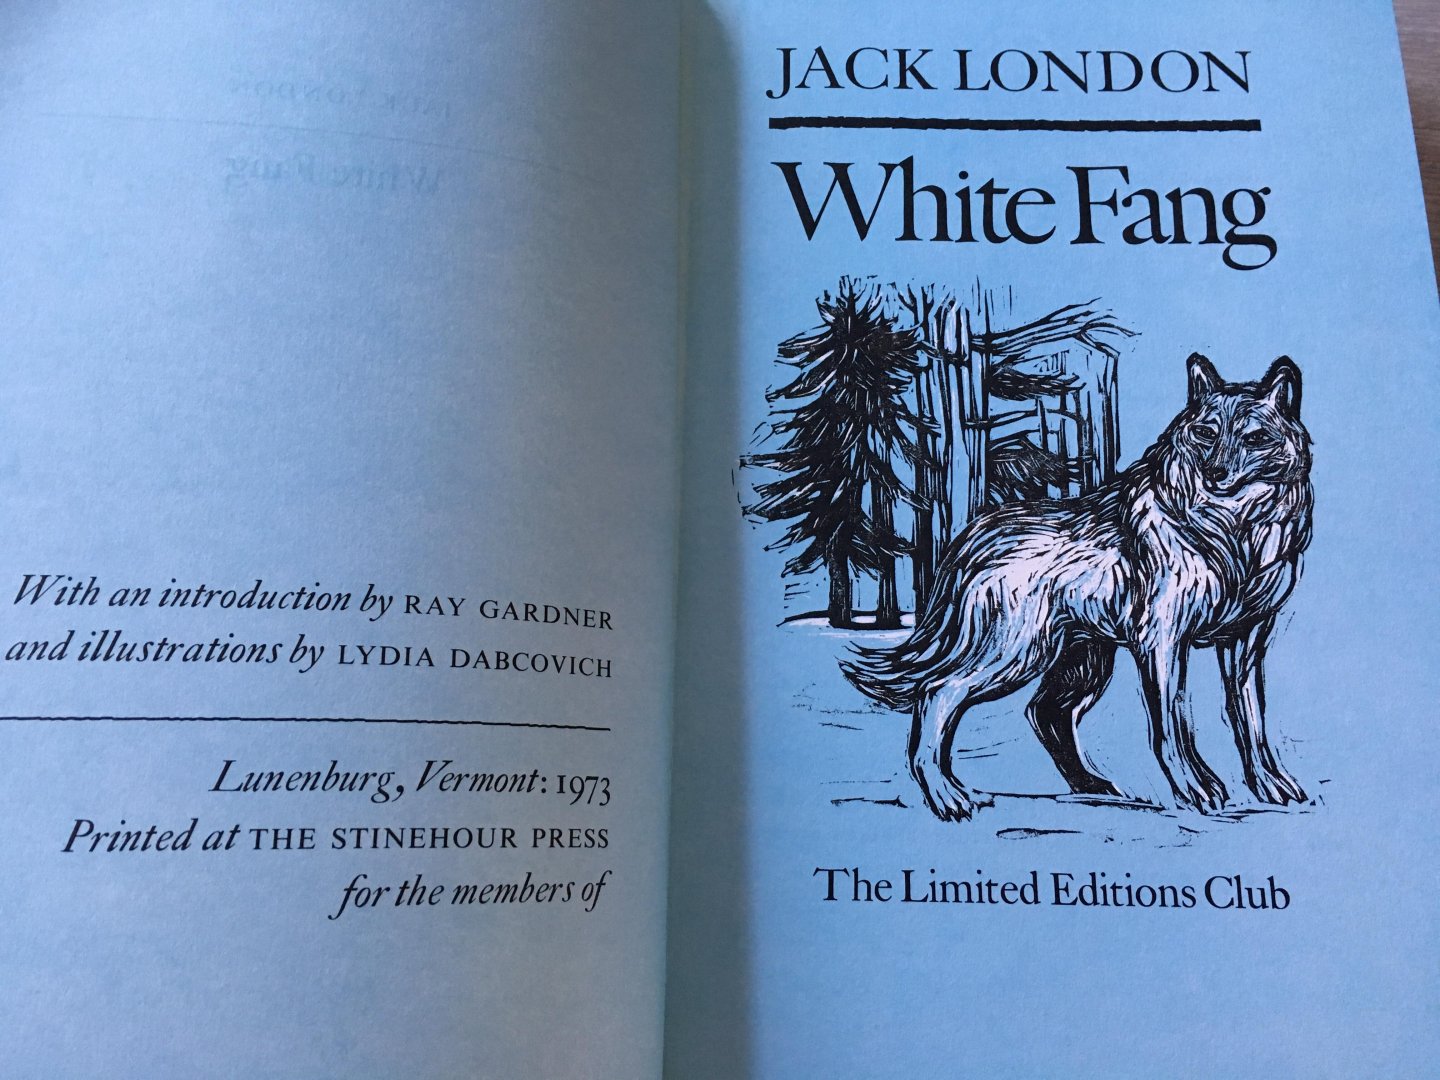 Jack London - The limited edition club; White Fang